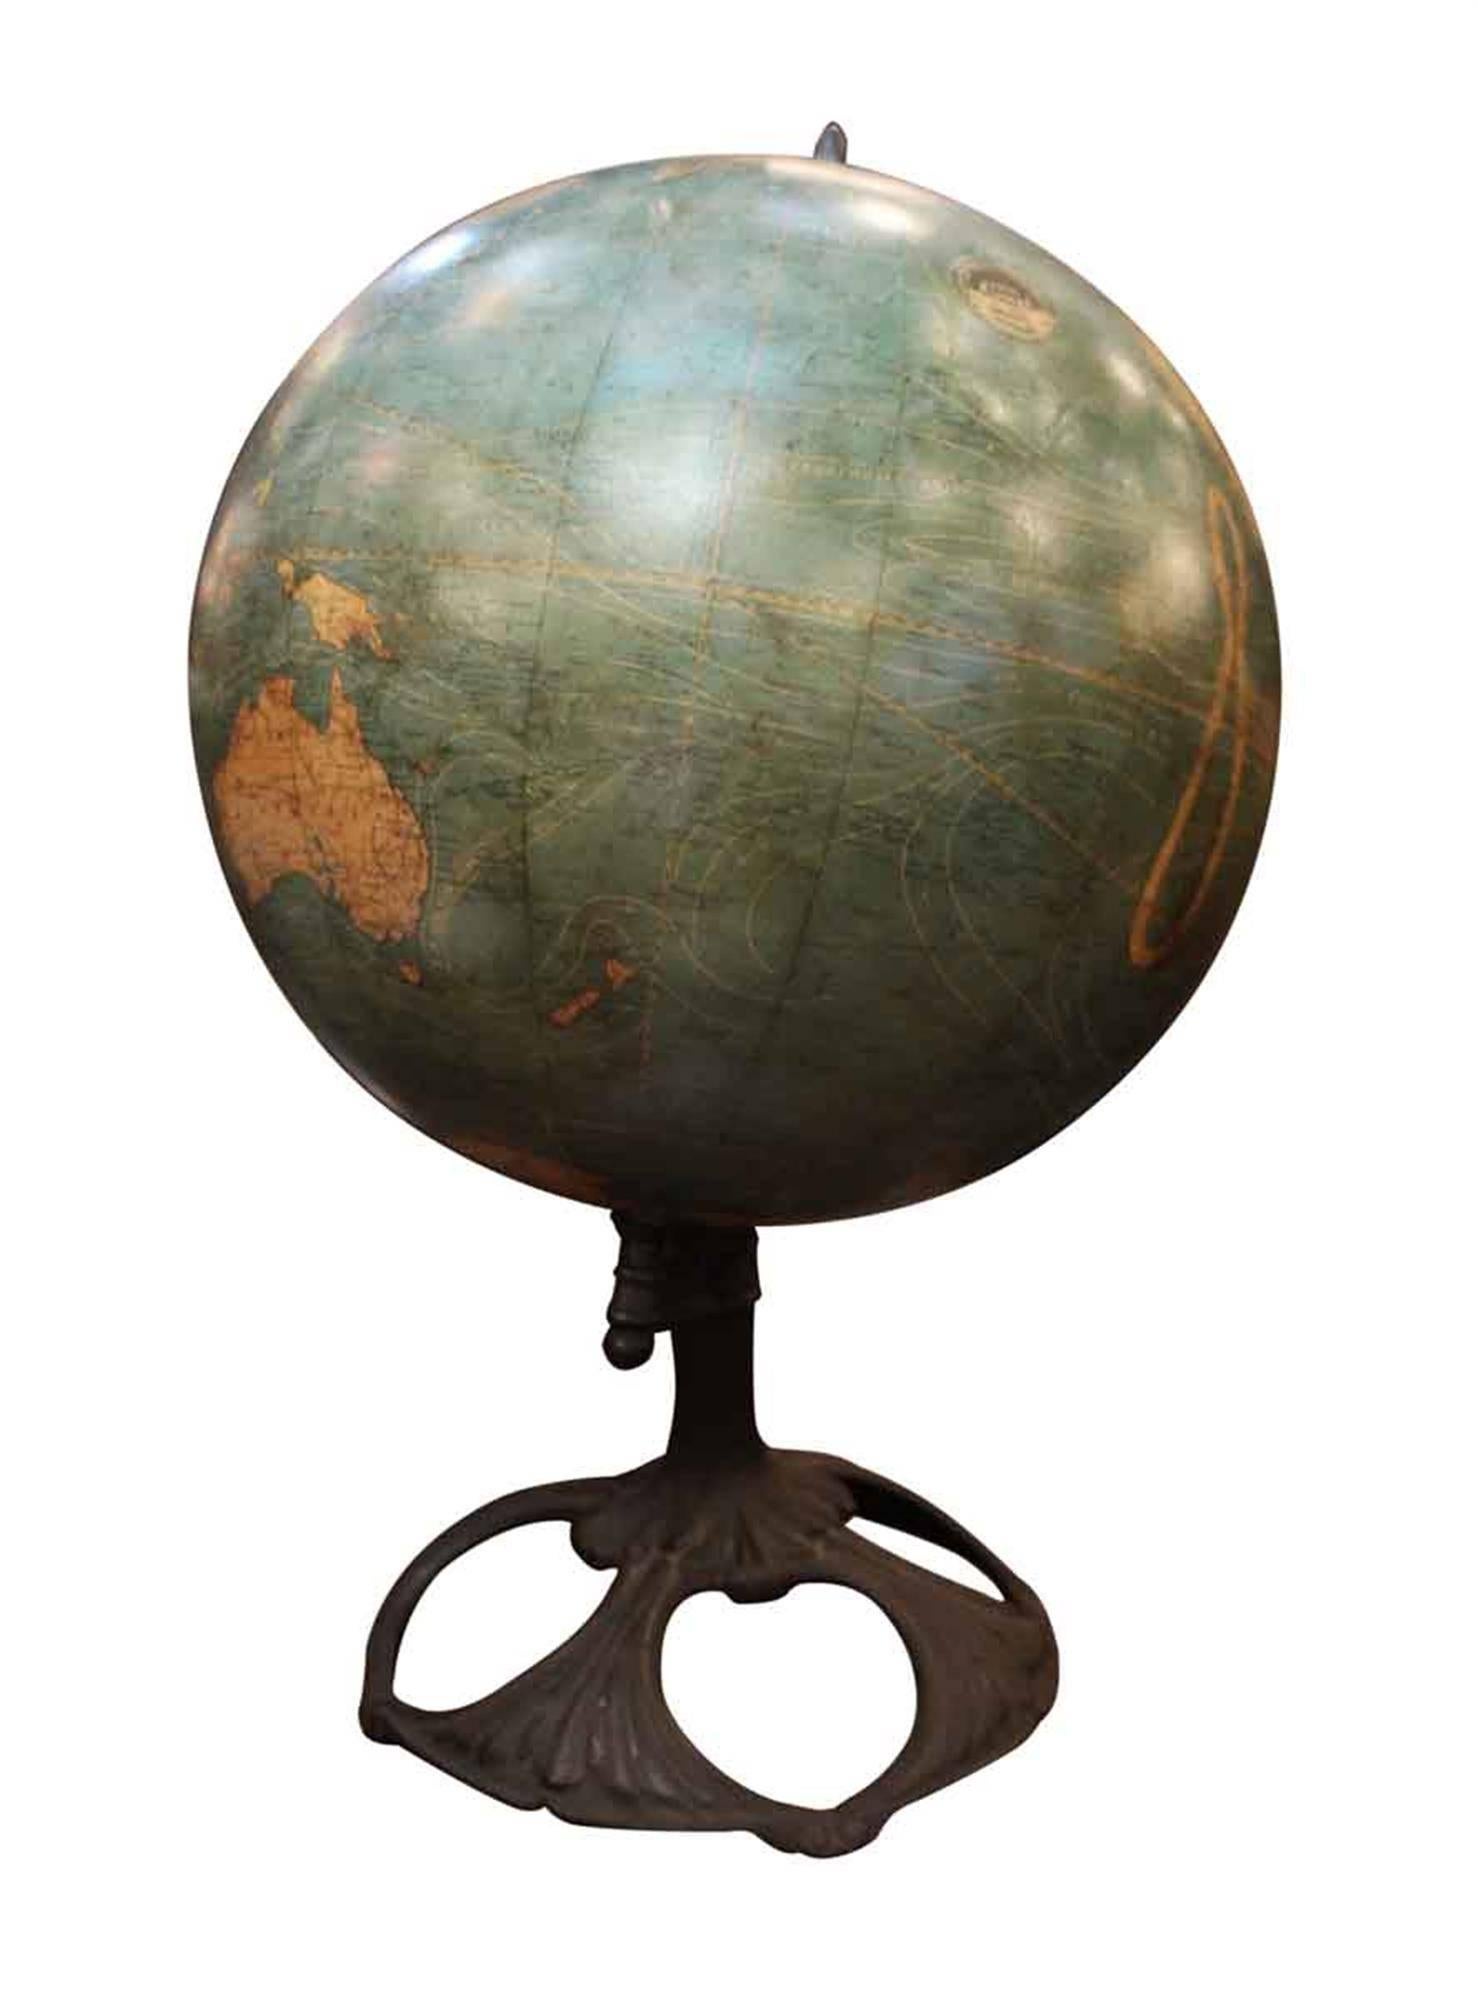 Antique Art Nouveau tabletop Johnson terrestrial globe with a cast iron base. W. & A.K. Johnston was among the most important figures in the production of globes in the late 19th century and early 20th century. Although a British manufacturer, they